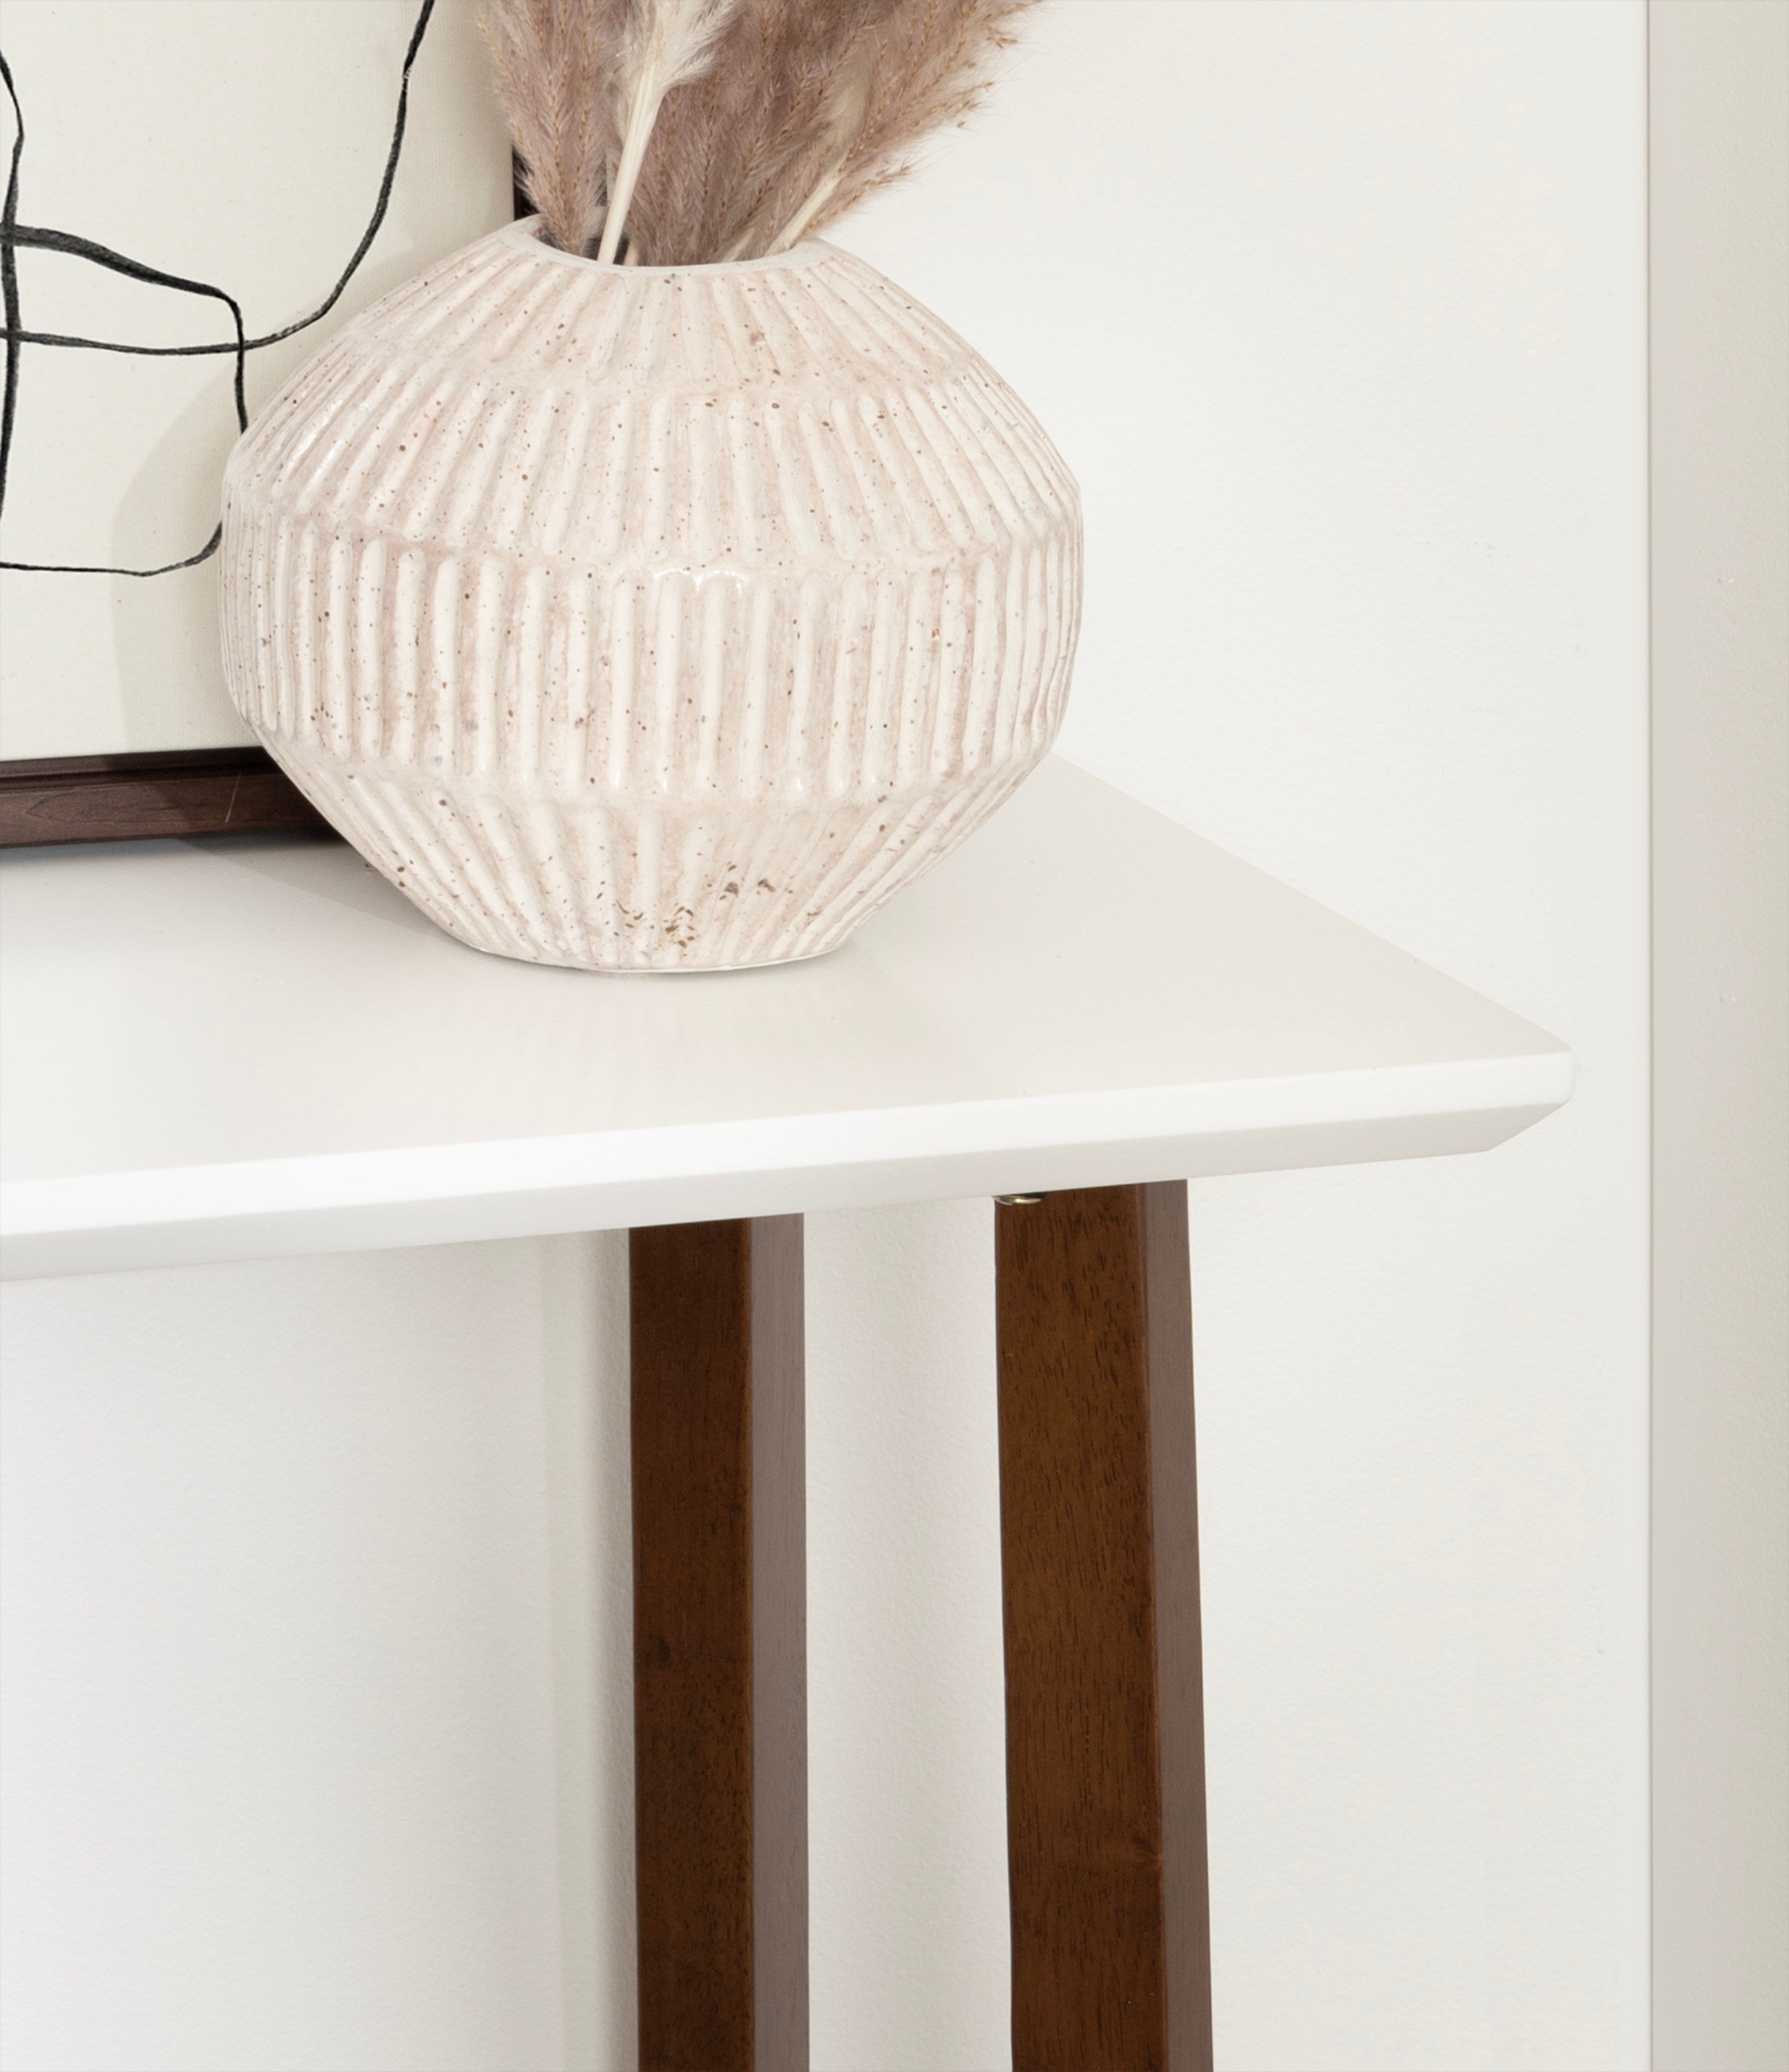 Olivant Wooden Console Table